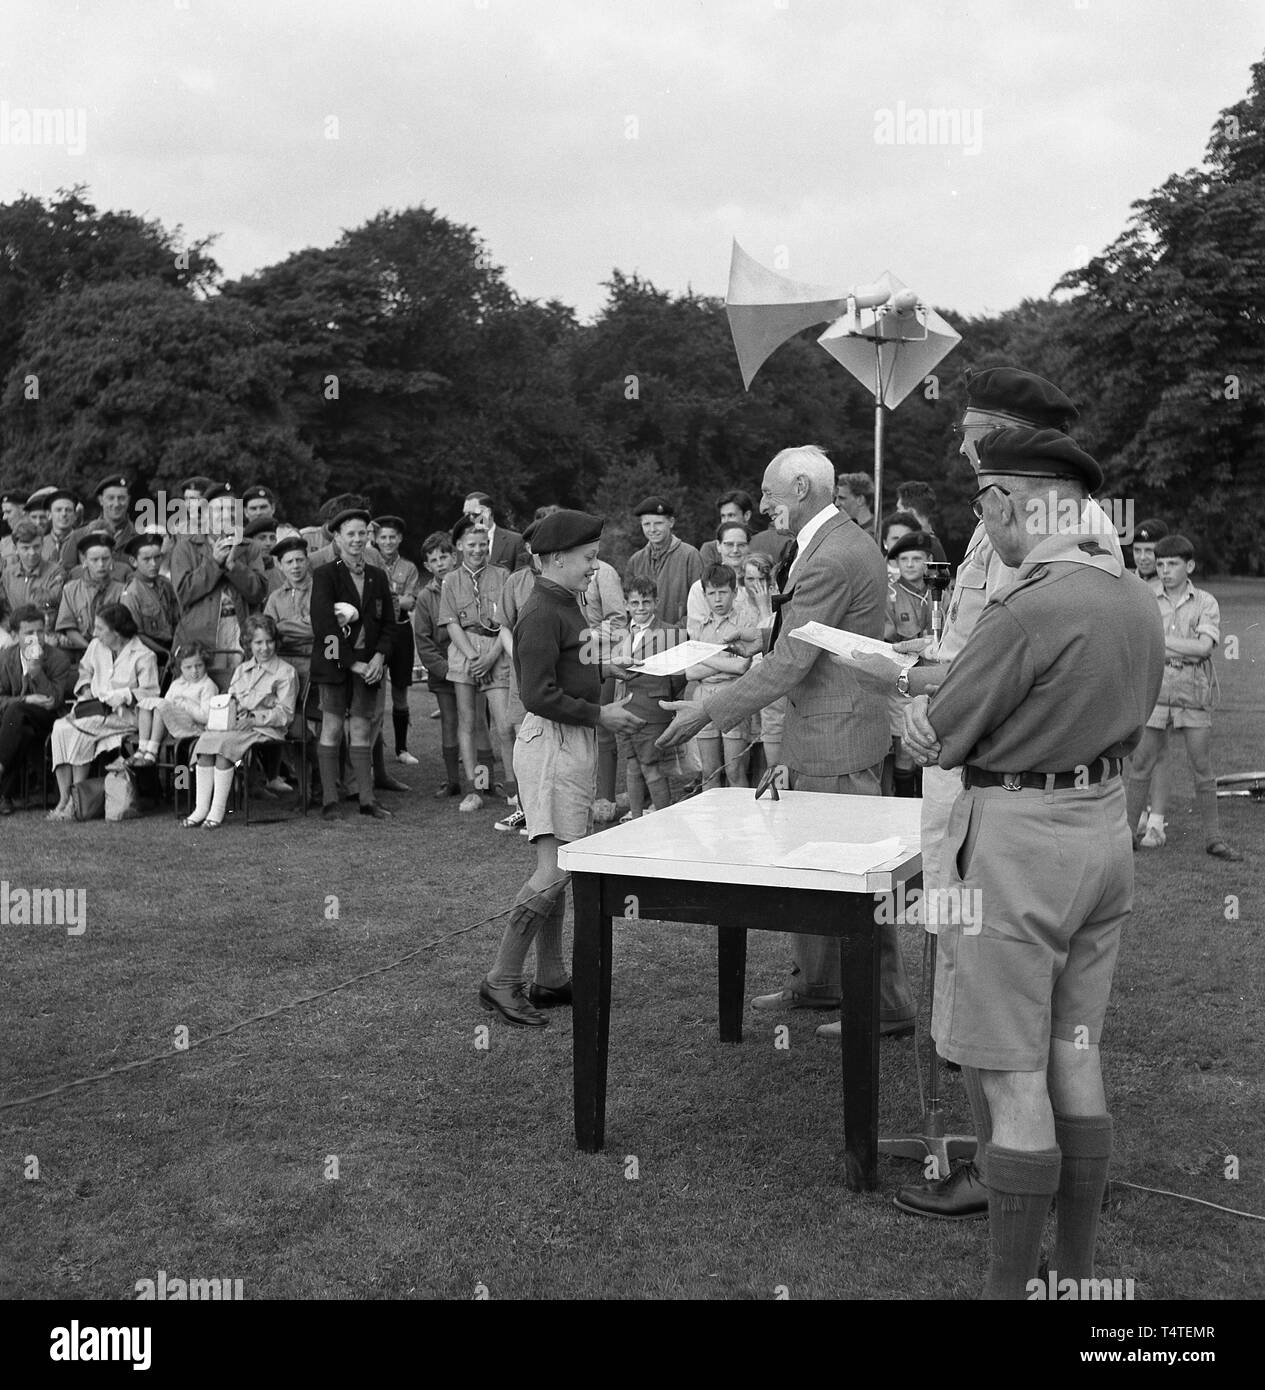 1960s. historical, outside in a field at a scouting ceremony, a young boy scout receiving a cub scout award achievement certificate from the scoutmaster and other team leaders at a table, England, UK. Stock Photo